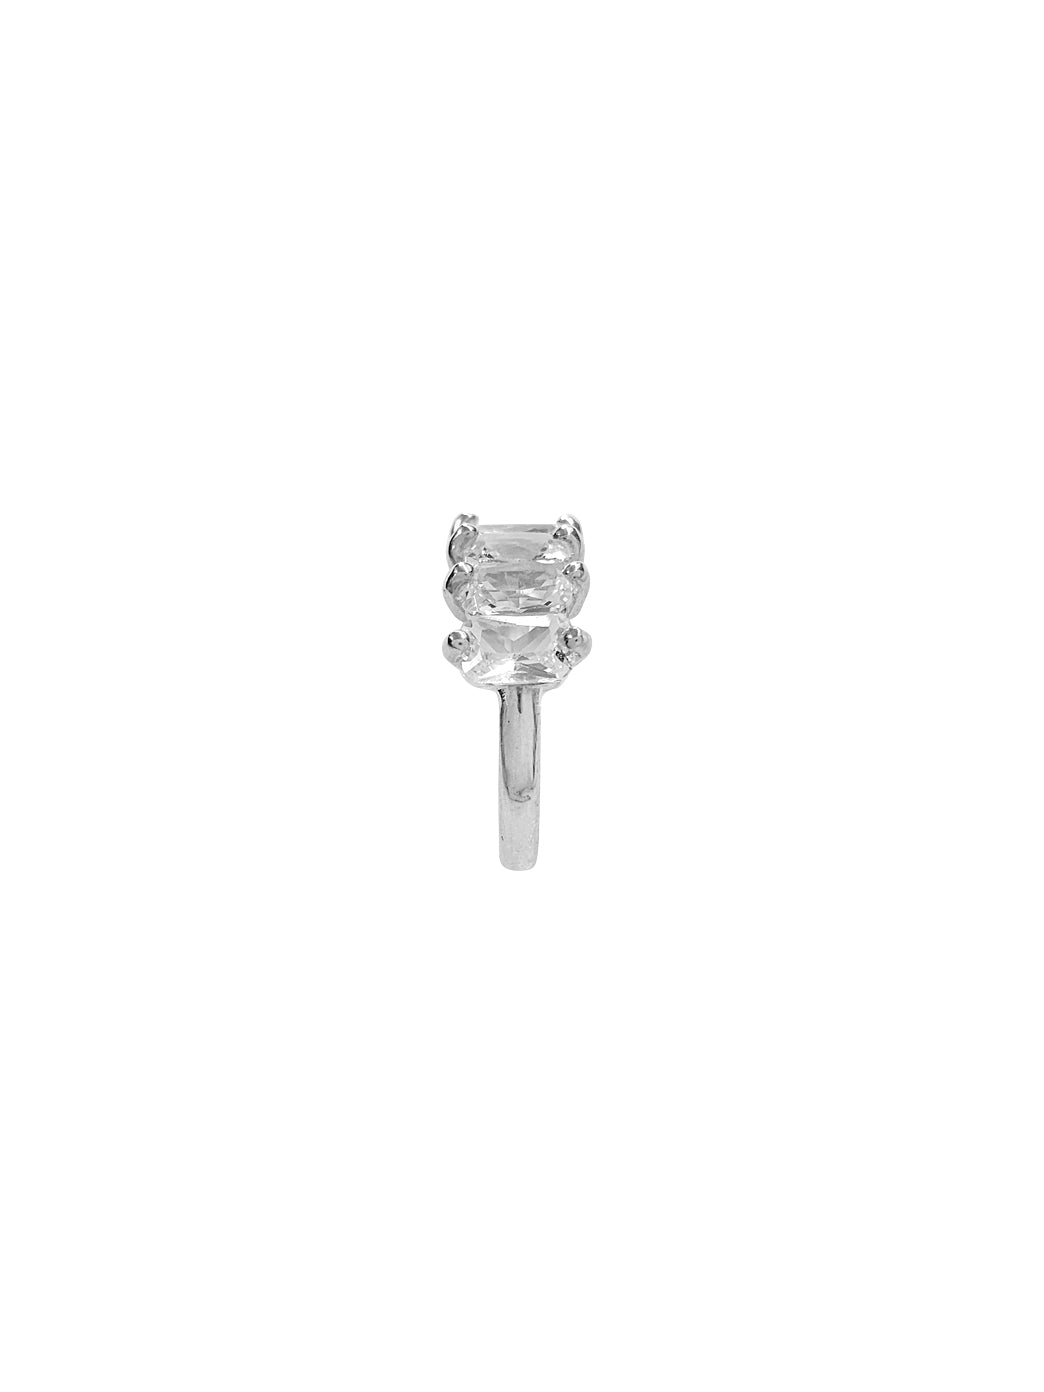 Fiorina Jewellery Cuba Ring White Spinel Shank View